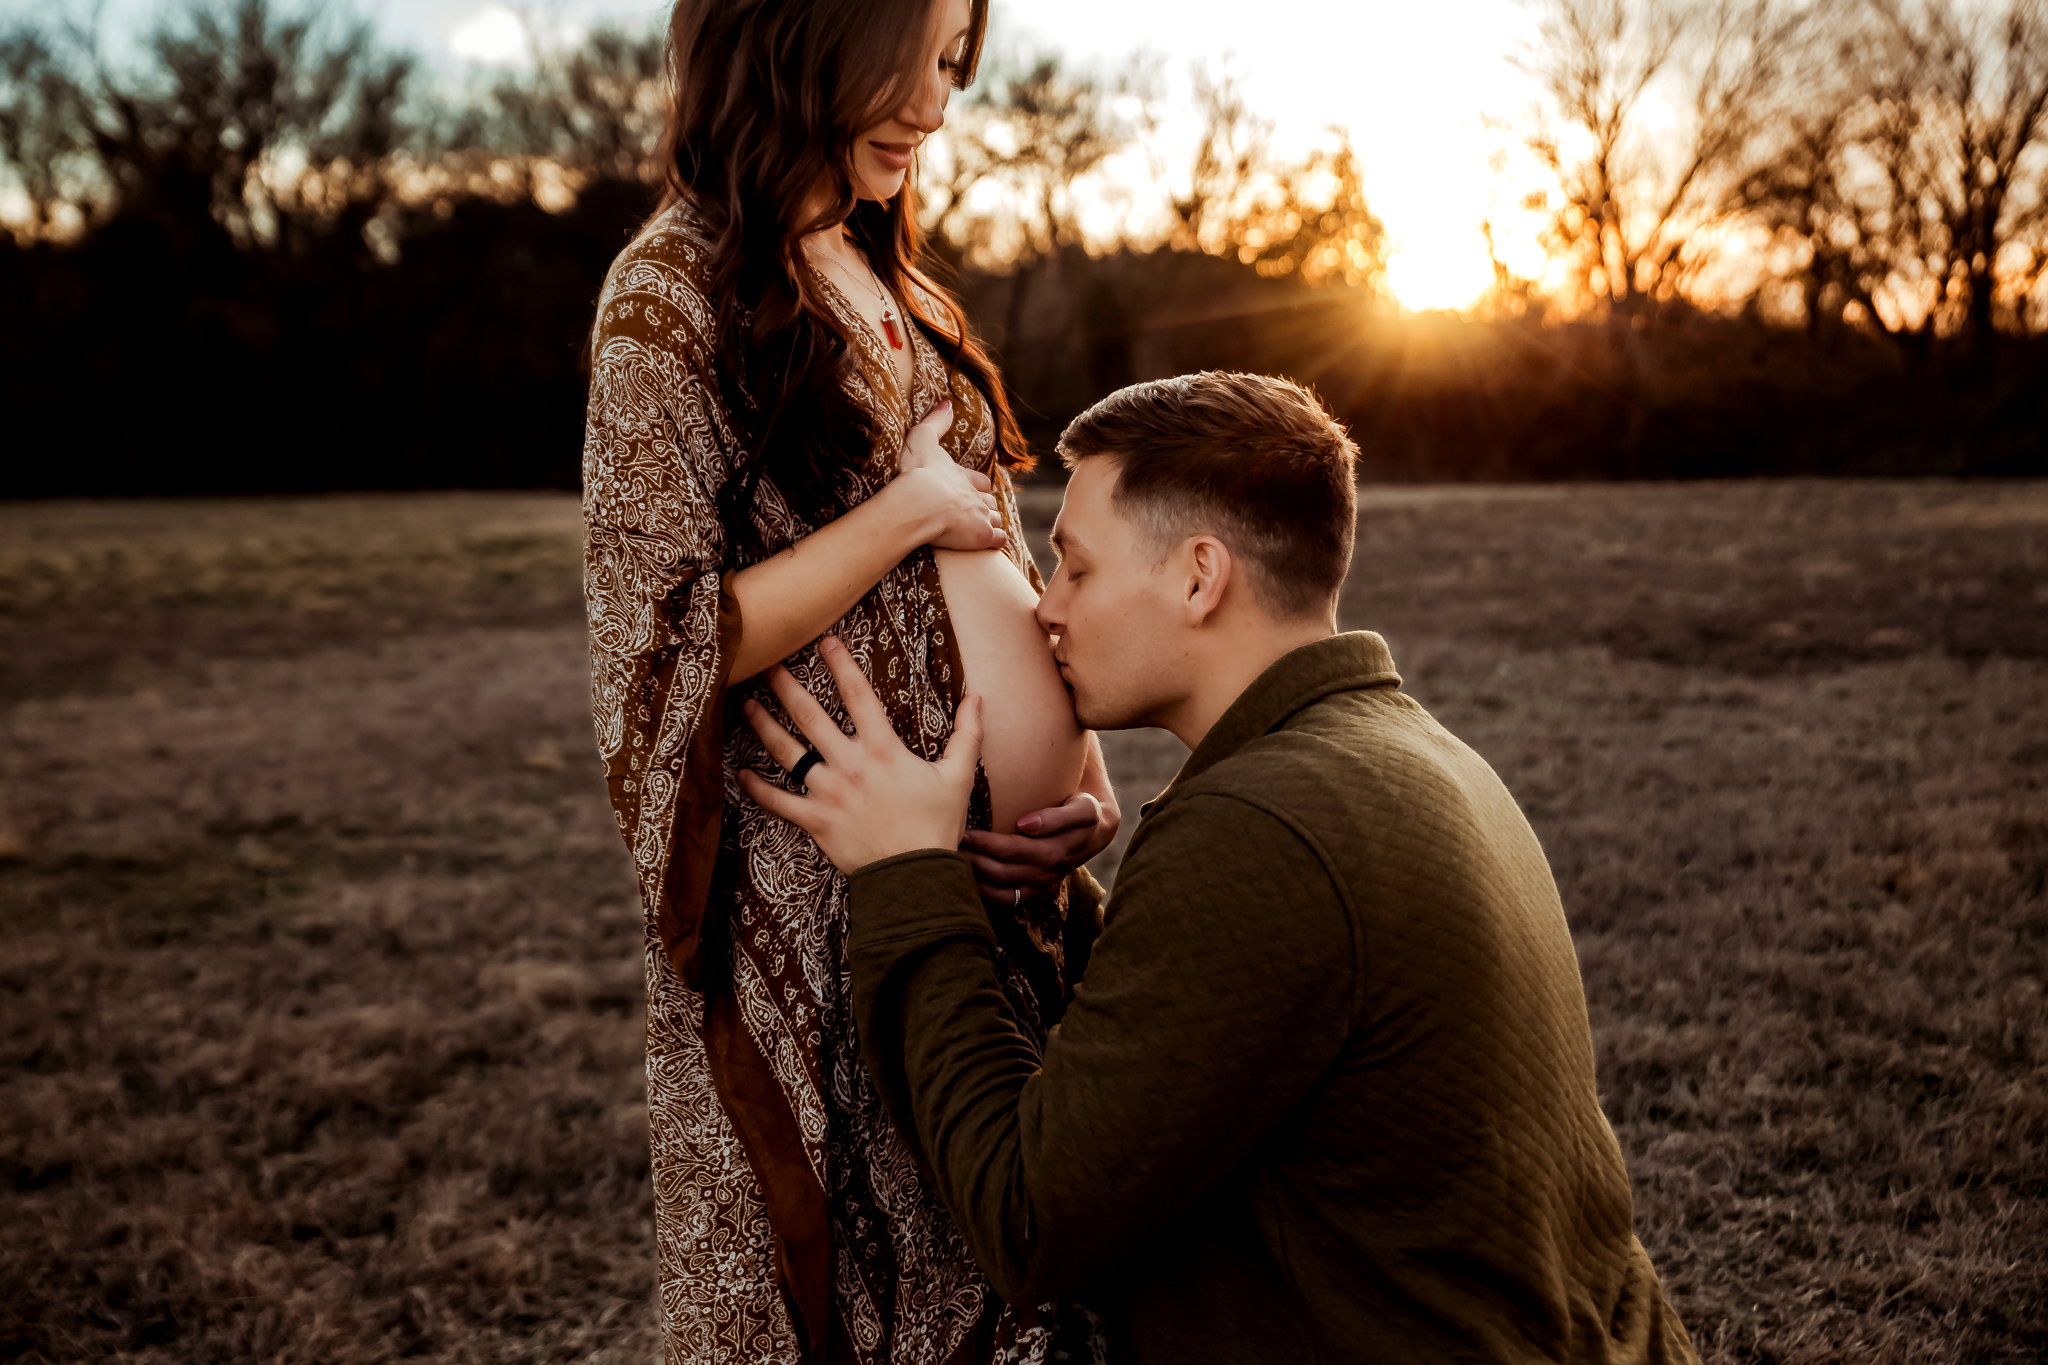 dad kissing baby bump in a pregnancy photoshoot poses